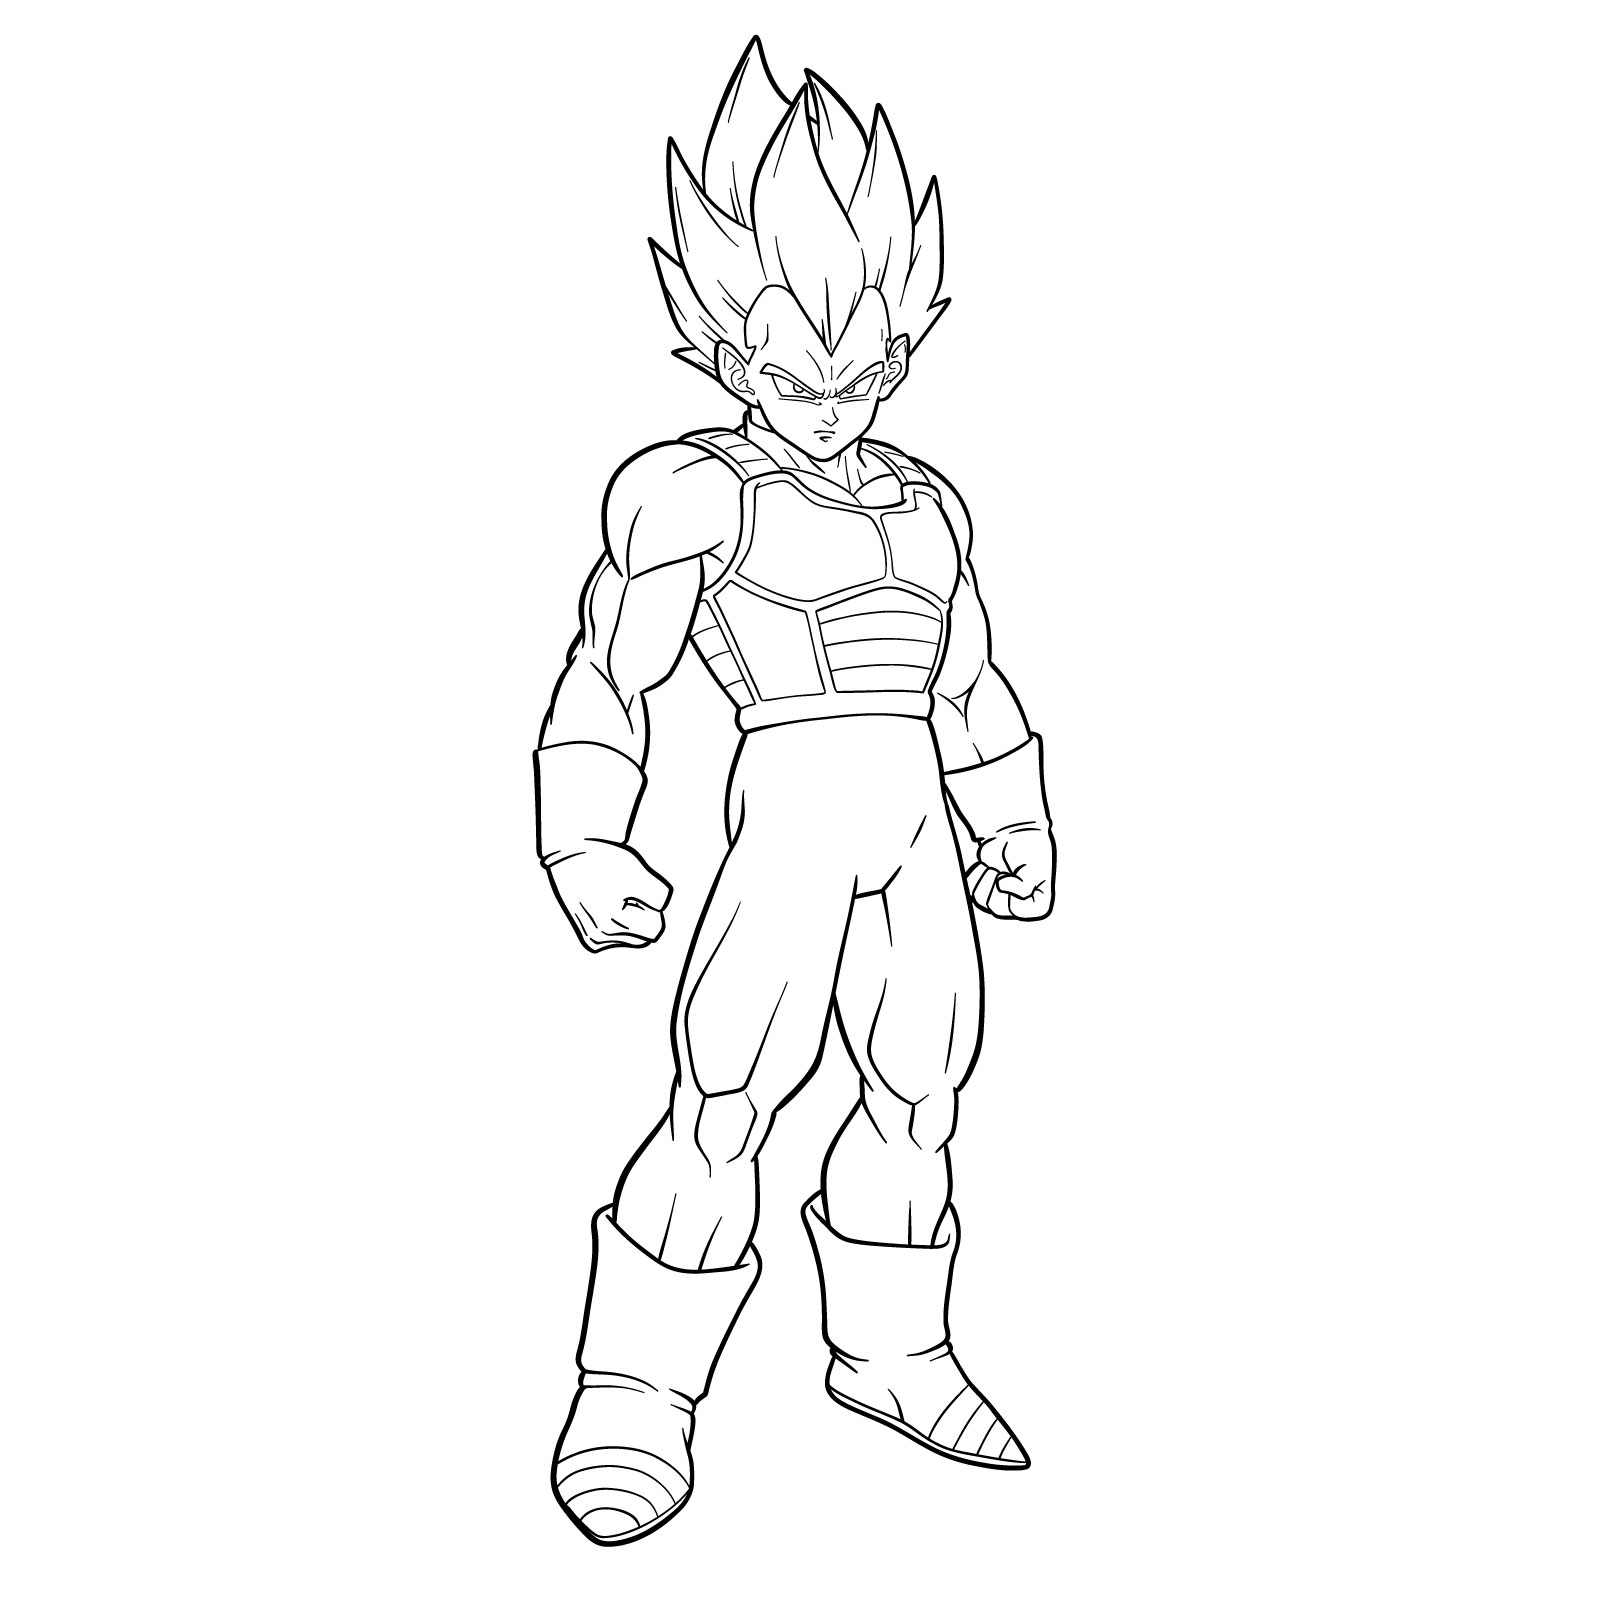 How to draw Vegeta in SSGSS - final step